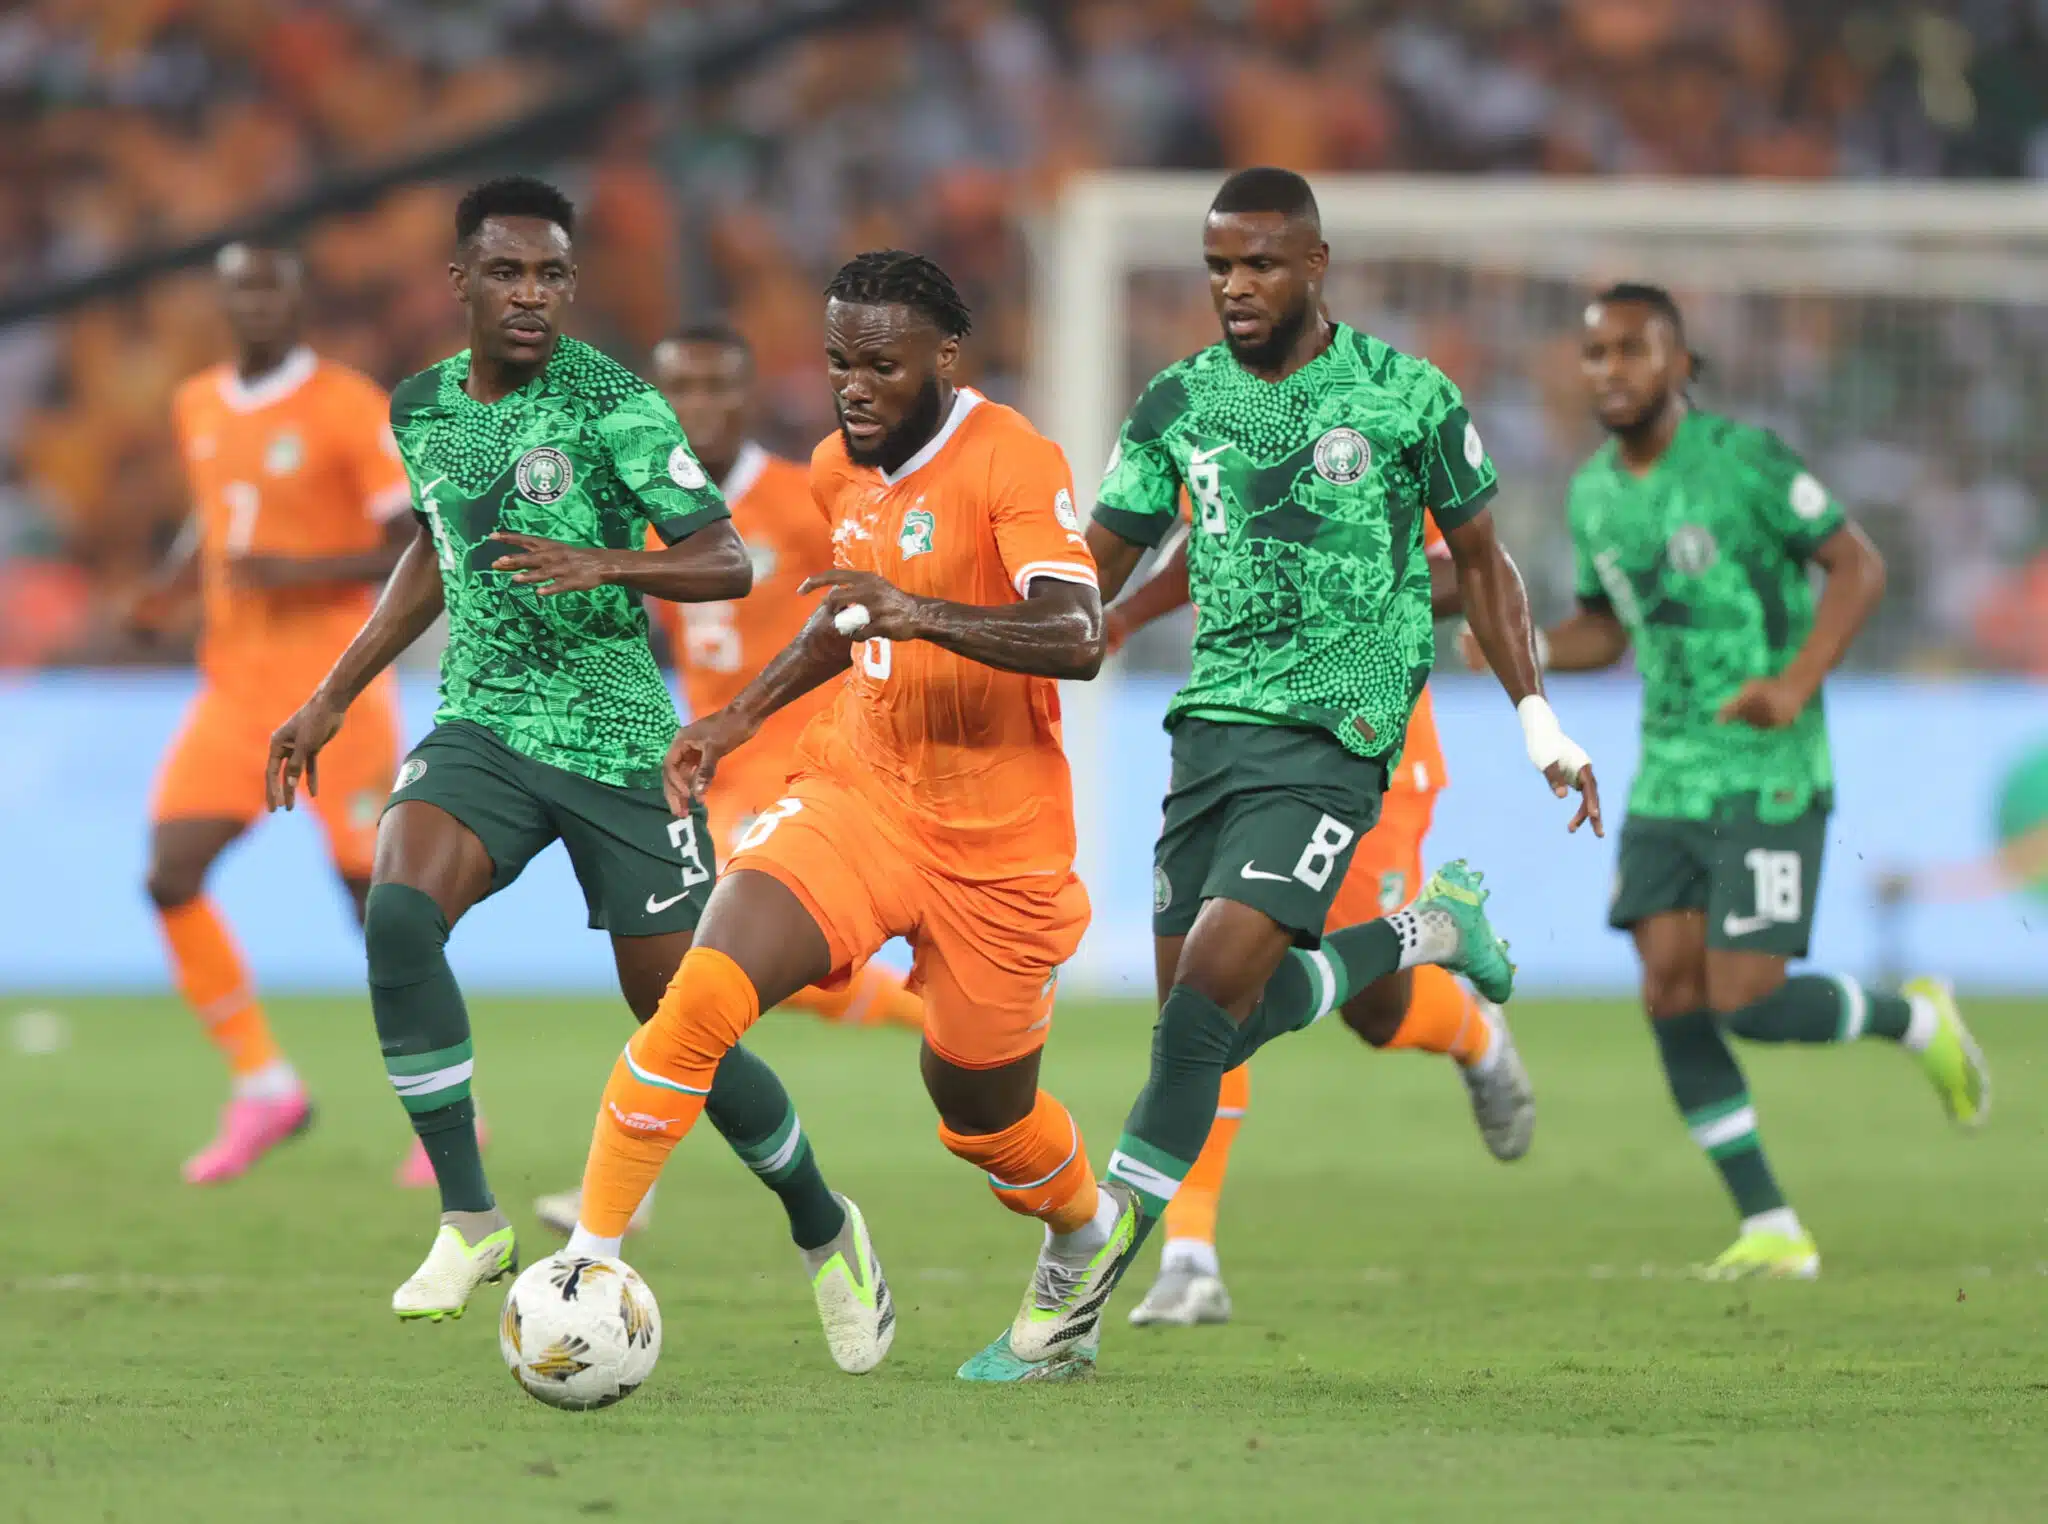 Super Eagles' Players' Ratings In Loss To Ivory Coast | Fab.ng